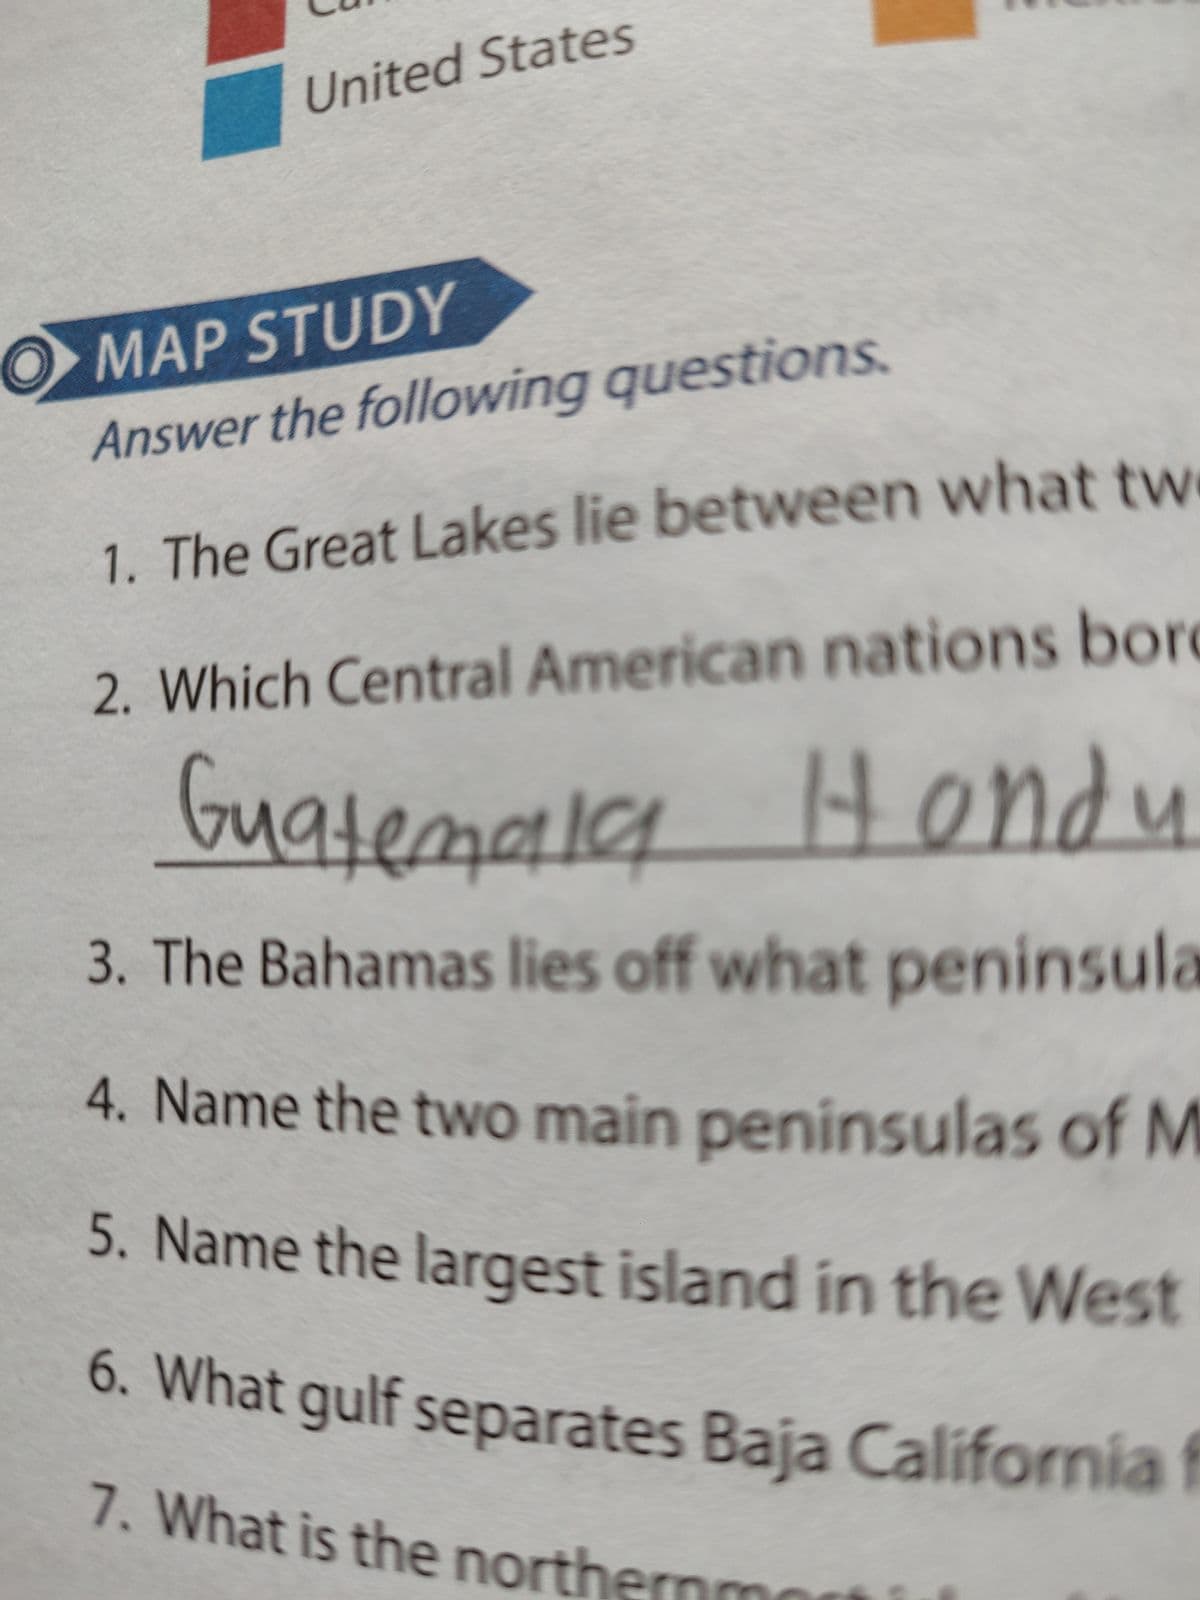 United States
OMAP STUDY
Answer the following questions.
1. The Great Lakes lie between what tw
2. Which Central American nations bor
Guatemala Hondu
3. The Bahamas lies off what peninsula
4. Name the two main peninsulas of M
5. Name the largest island in the West
6. What gulf separates Baja California f
7. What is the nort